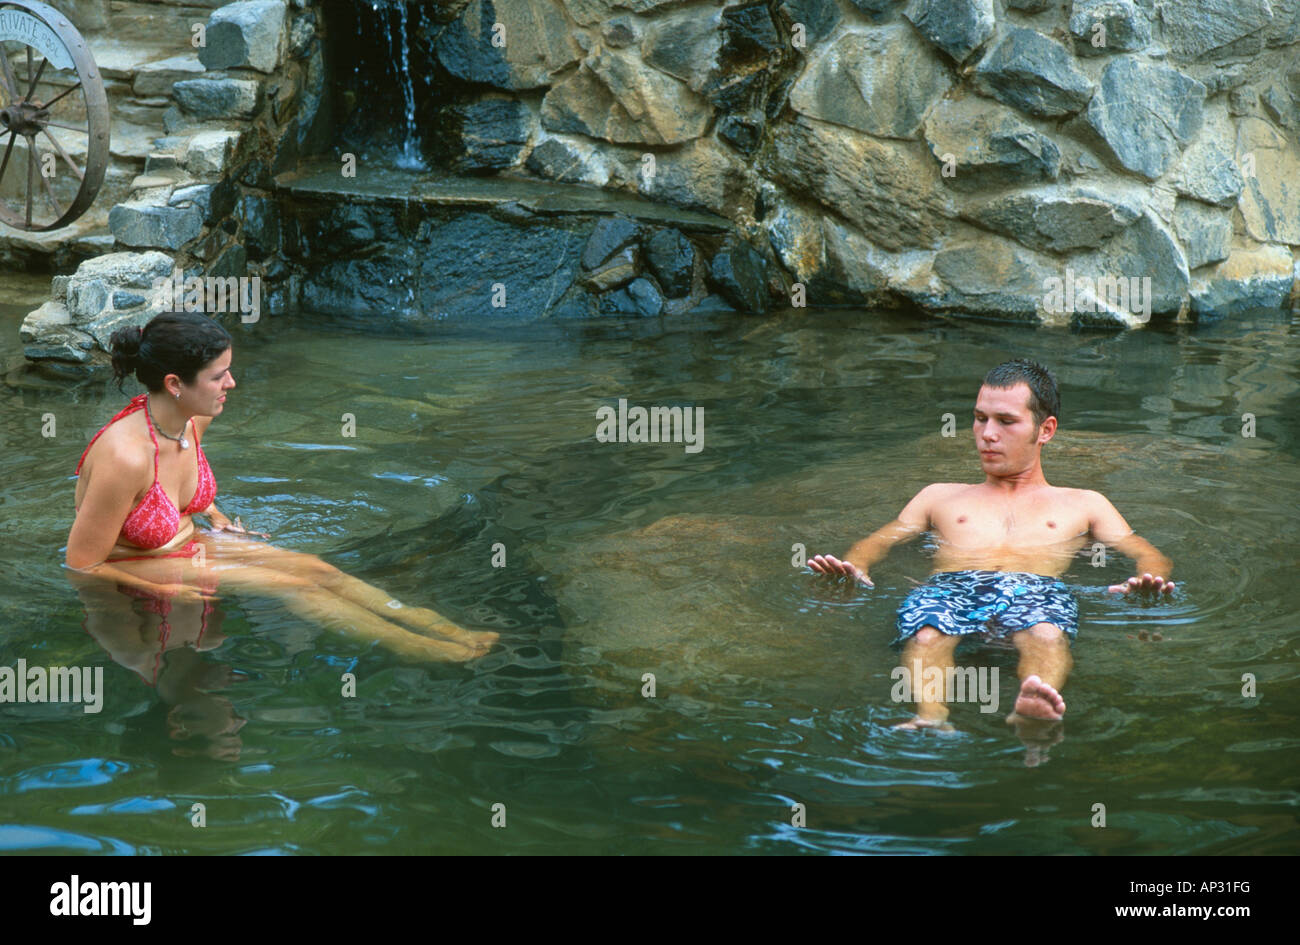 Couple in Strawberry Park Hot spring de Steamboat Springs, Colorado USA Banque D'Images